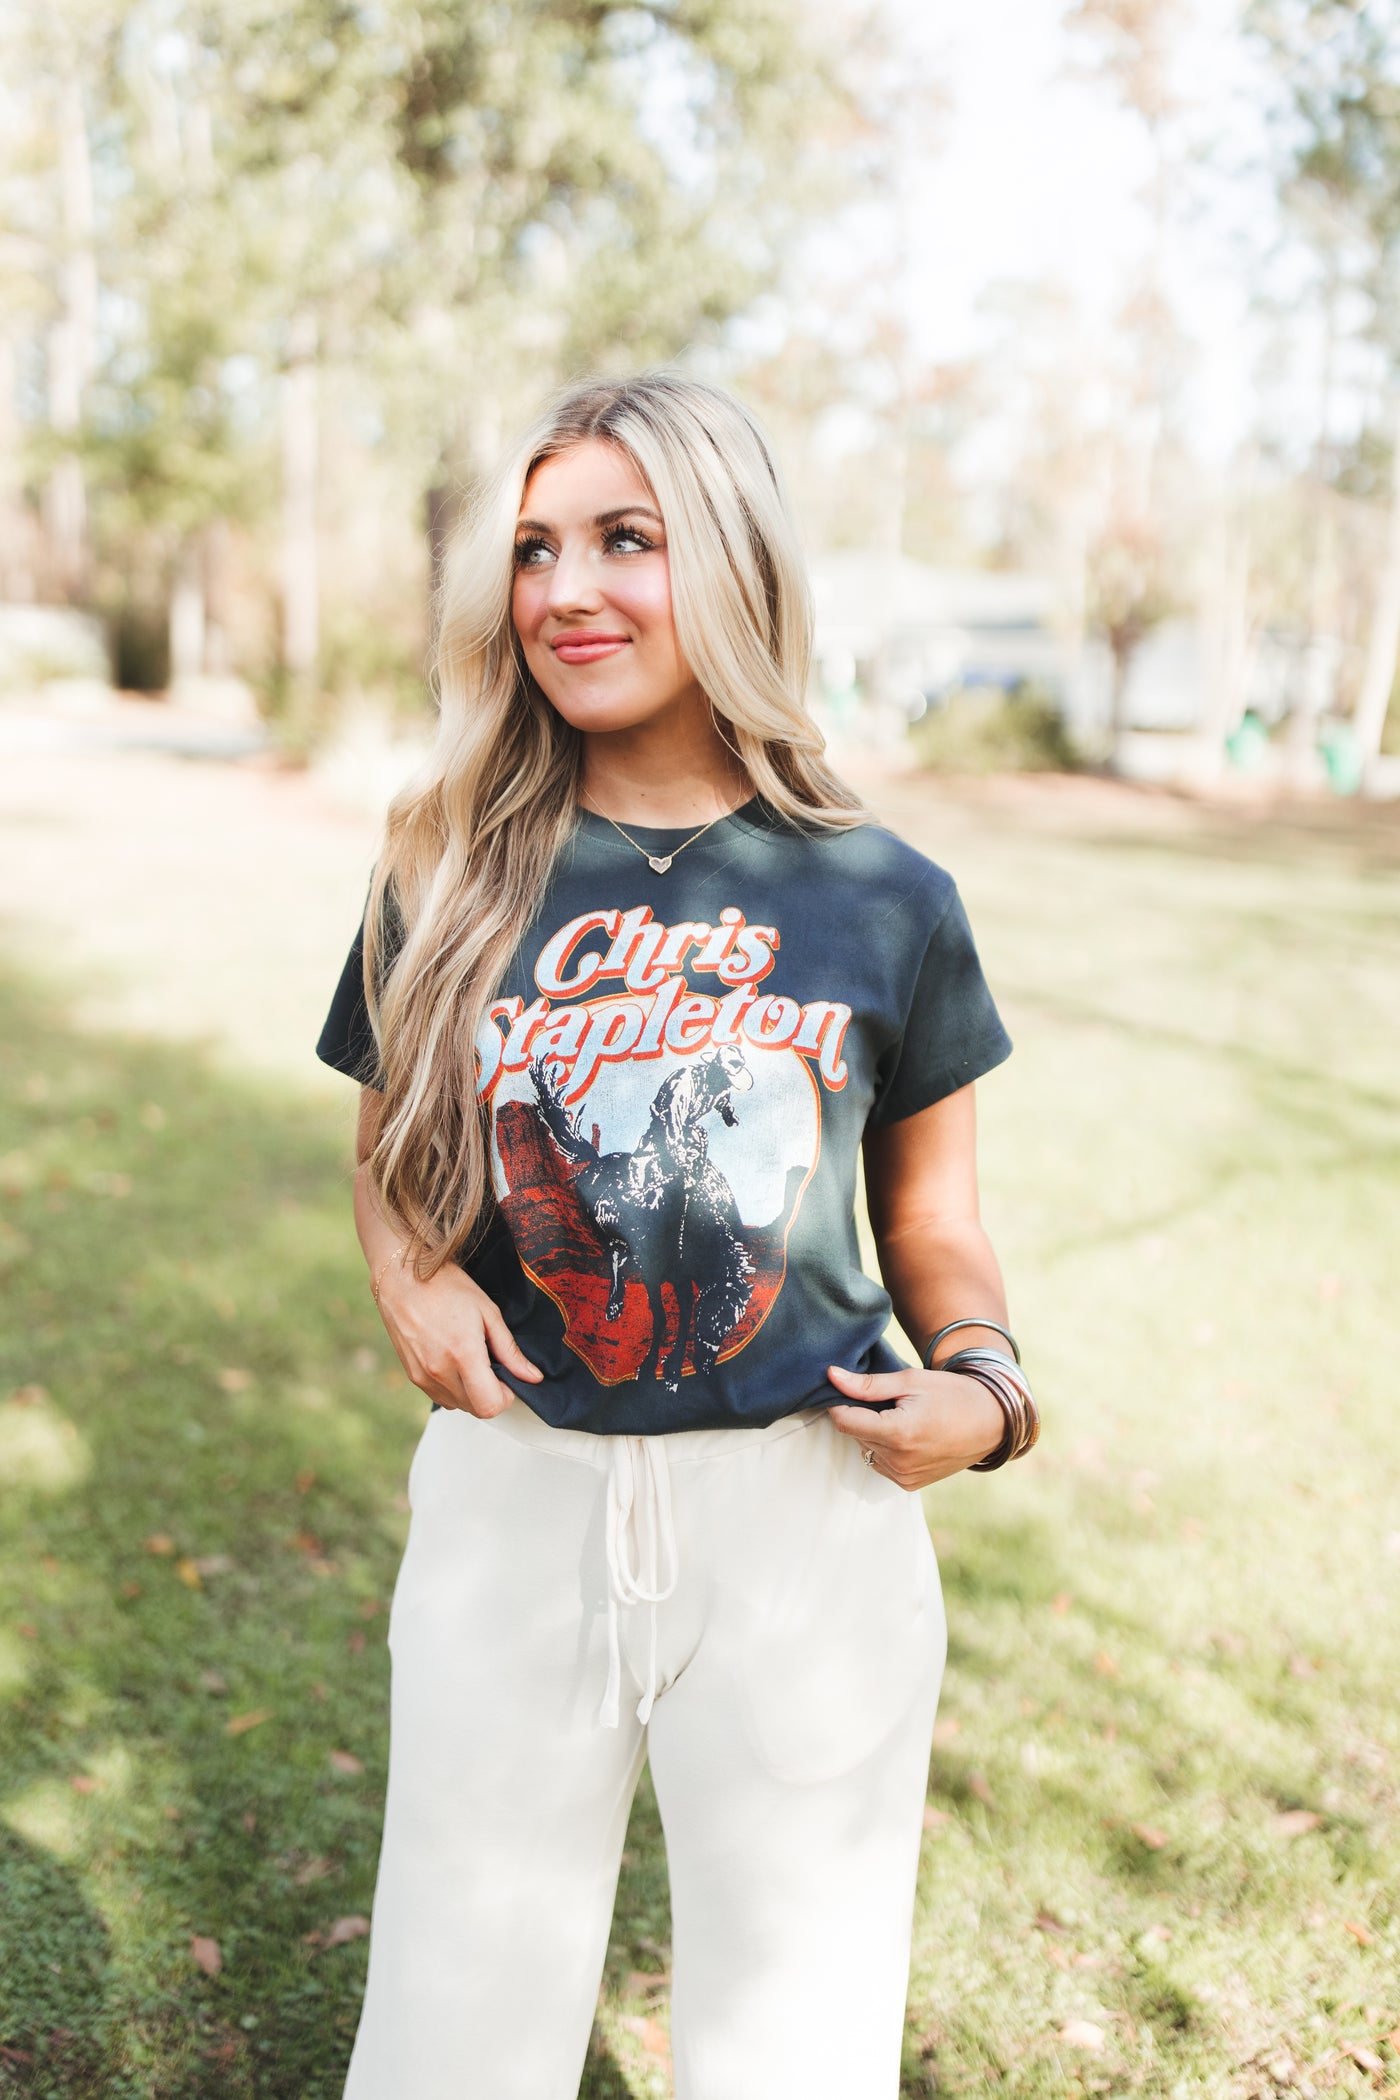 Daydreamer Chris Stapleton Horse and Canyons Tour Tee